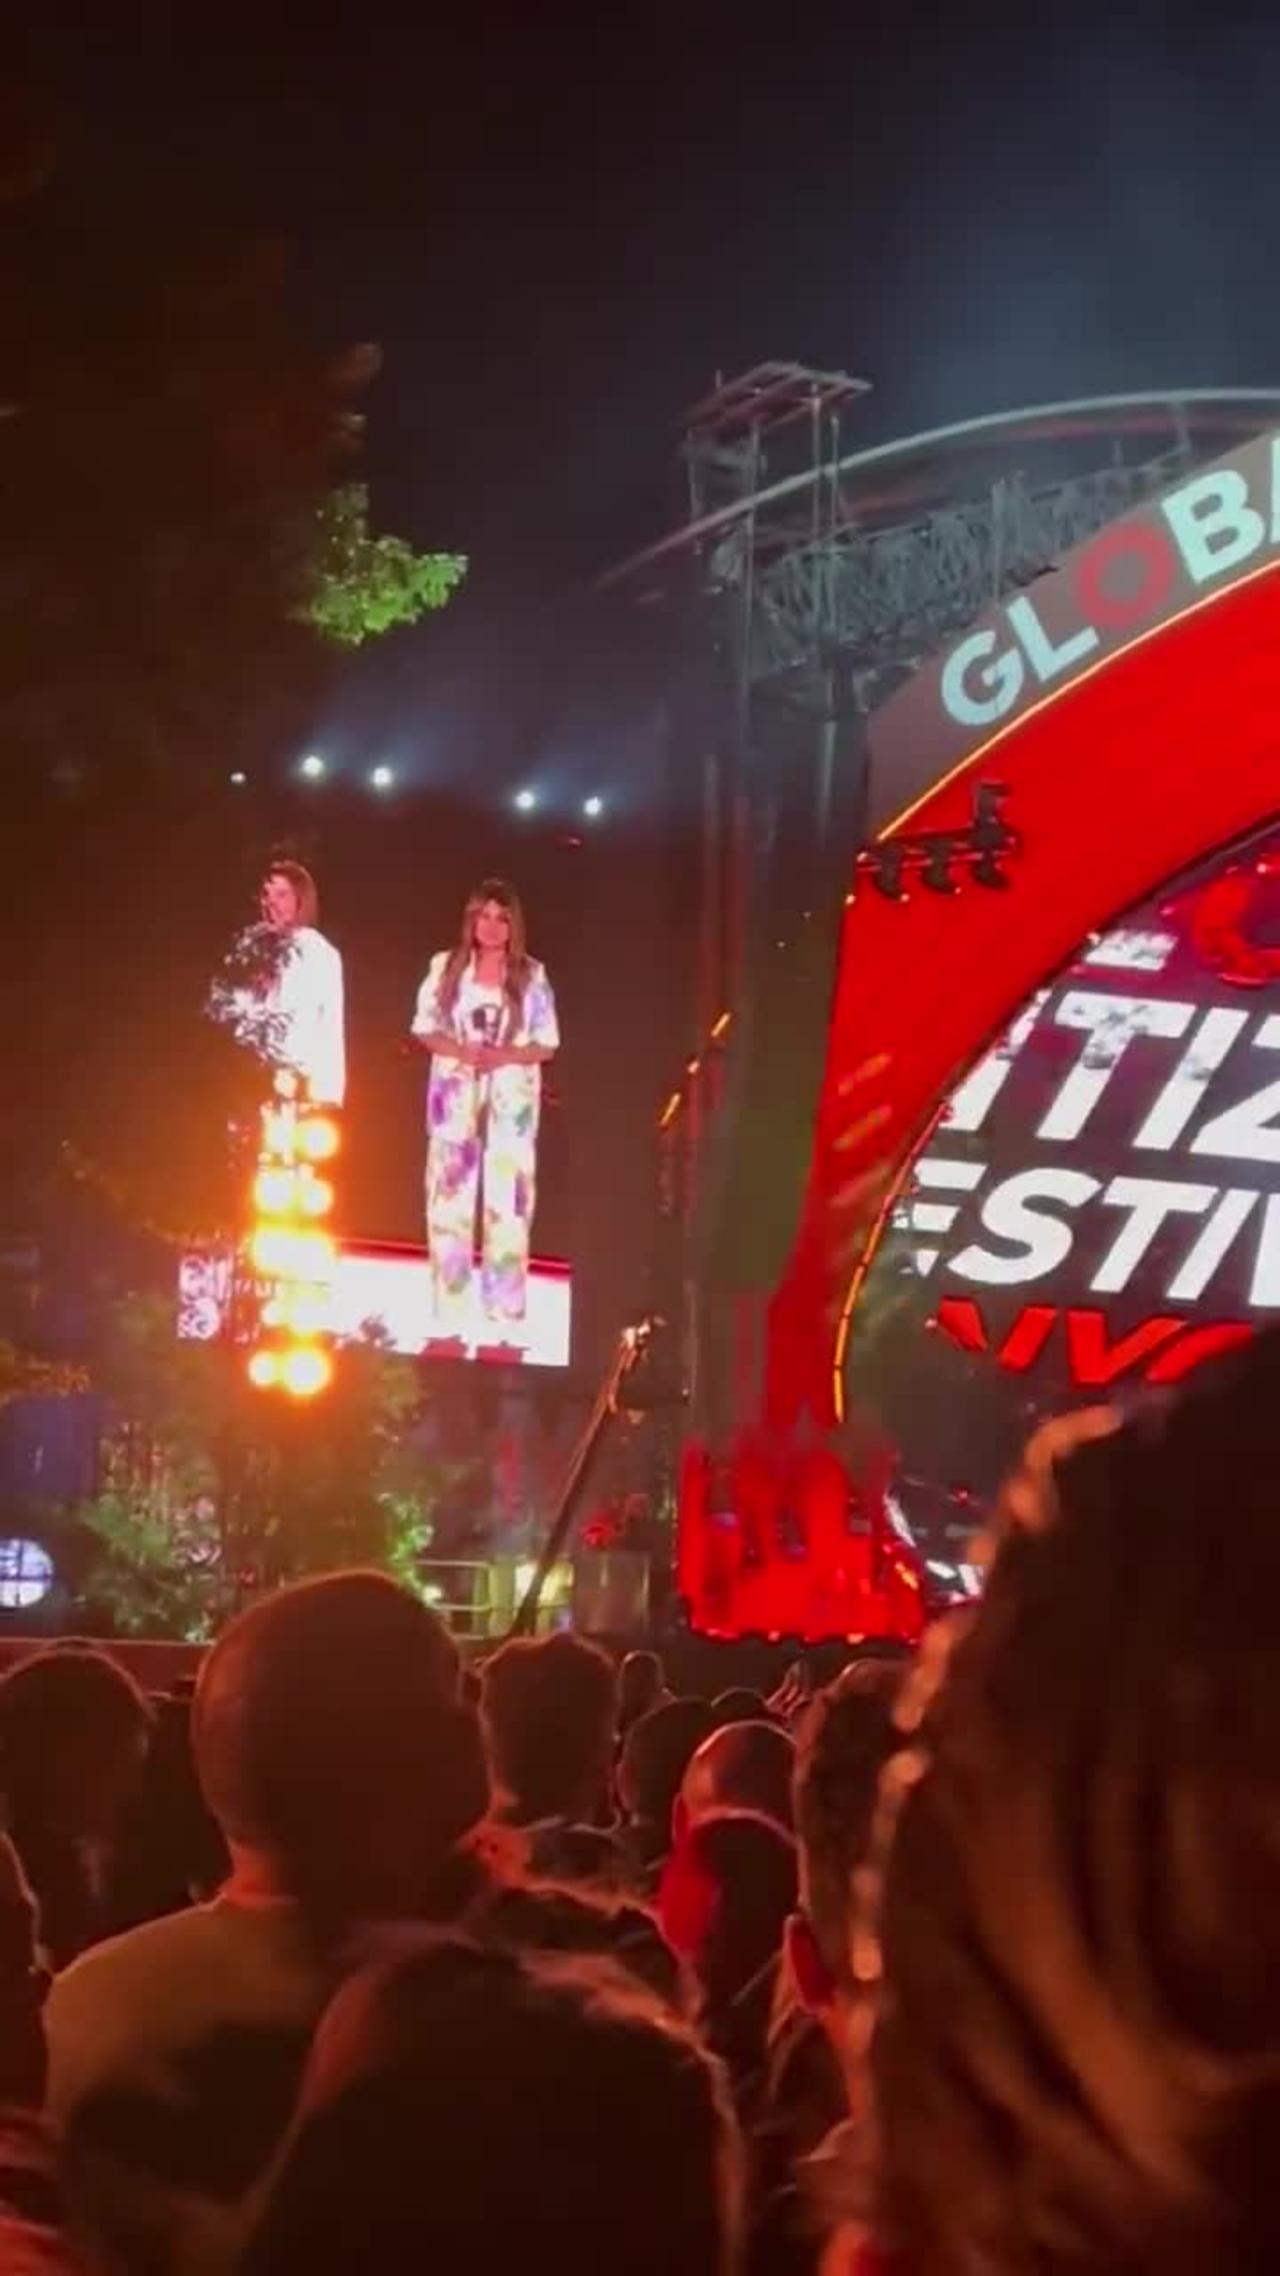 Nancy Pelosi gets savagely booed while appearing at Global Citizen festival in Central Park NYC